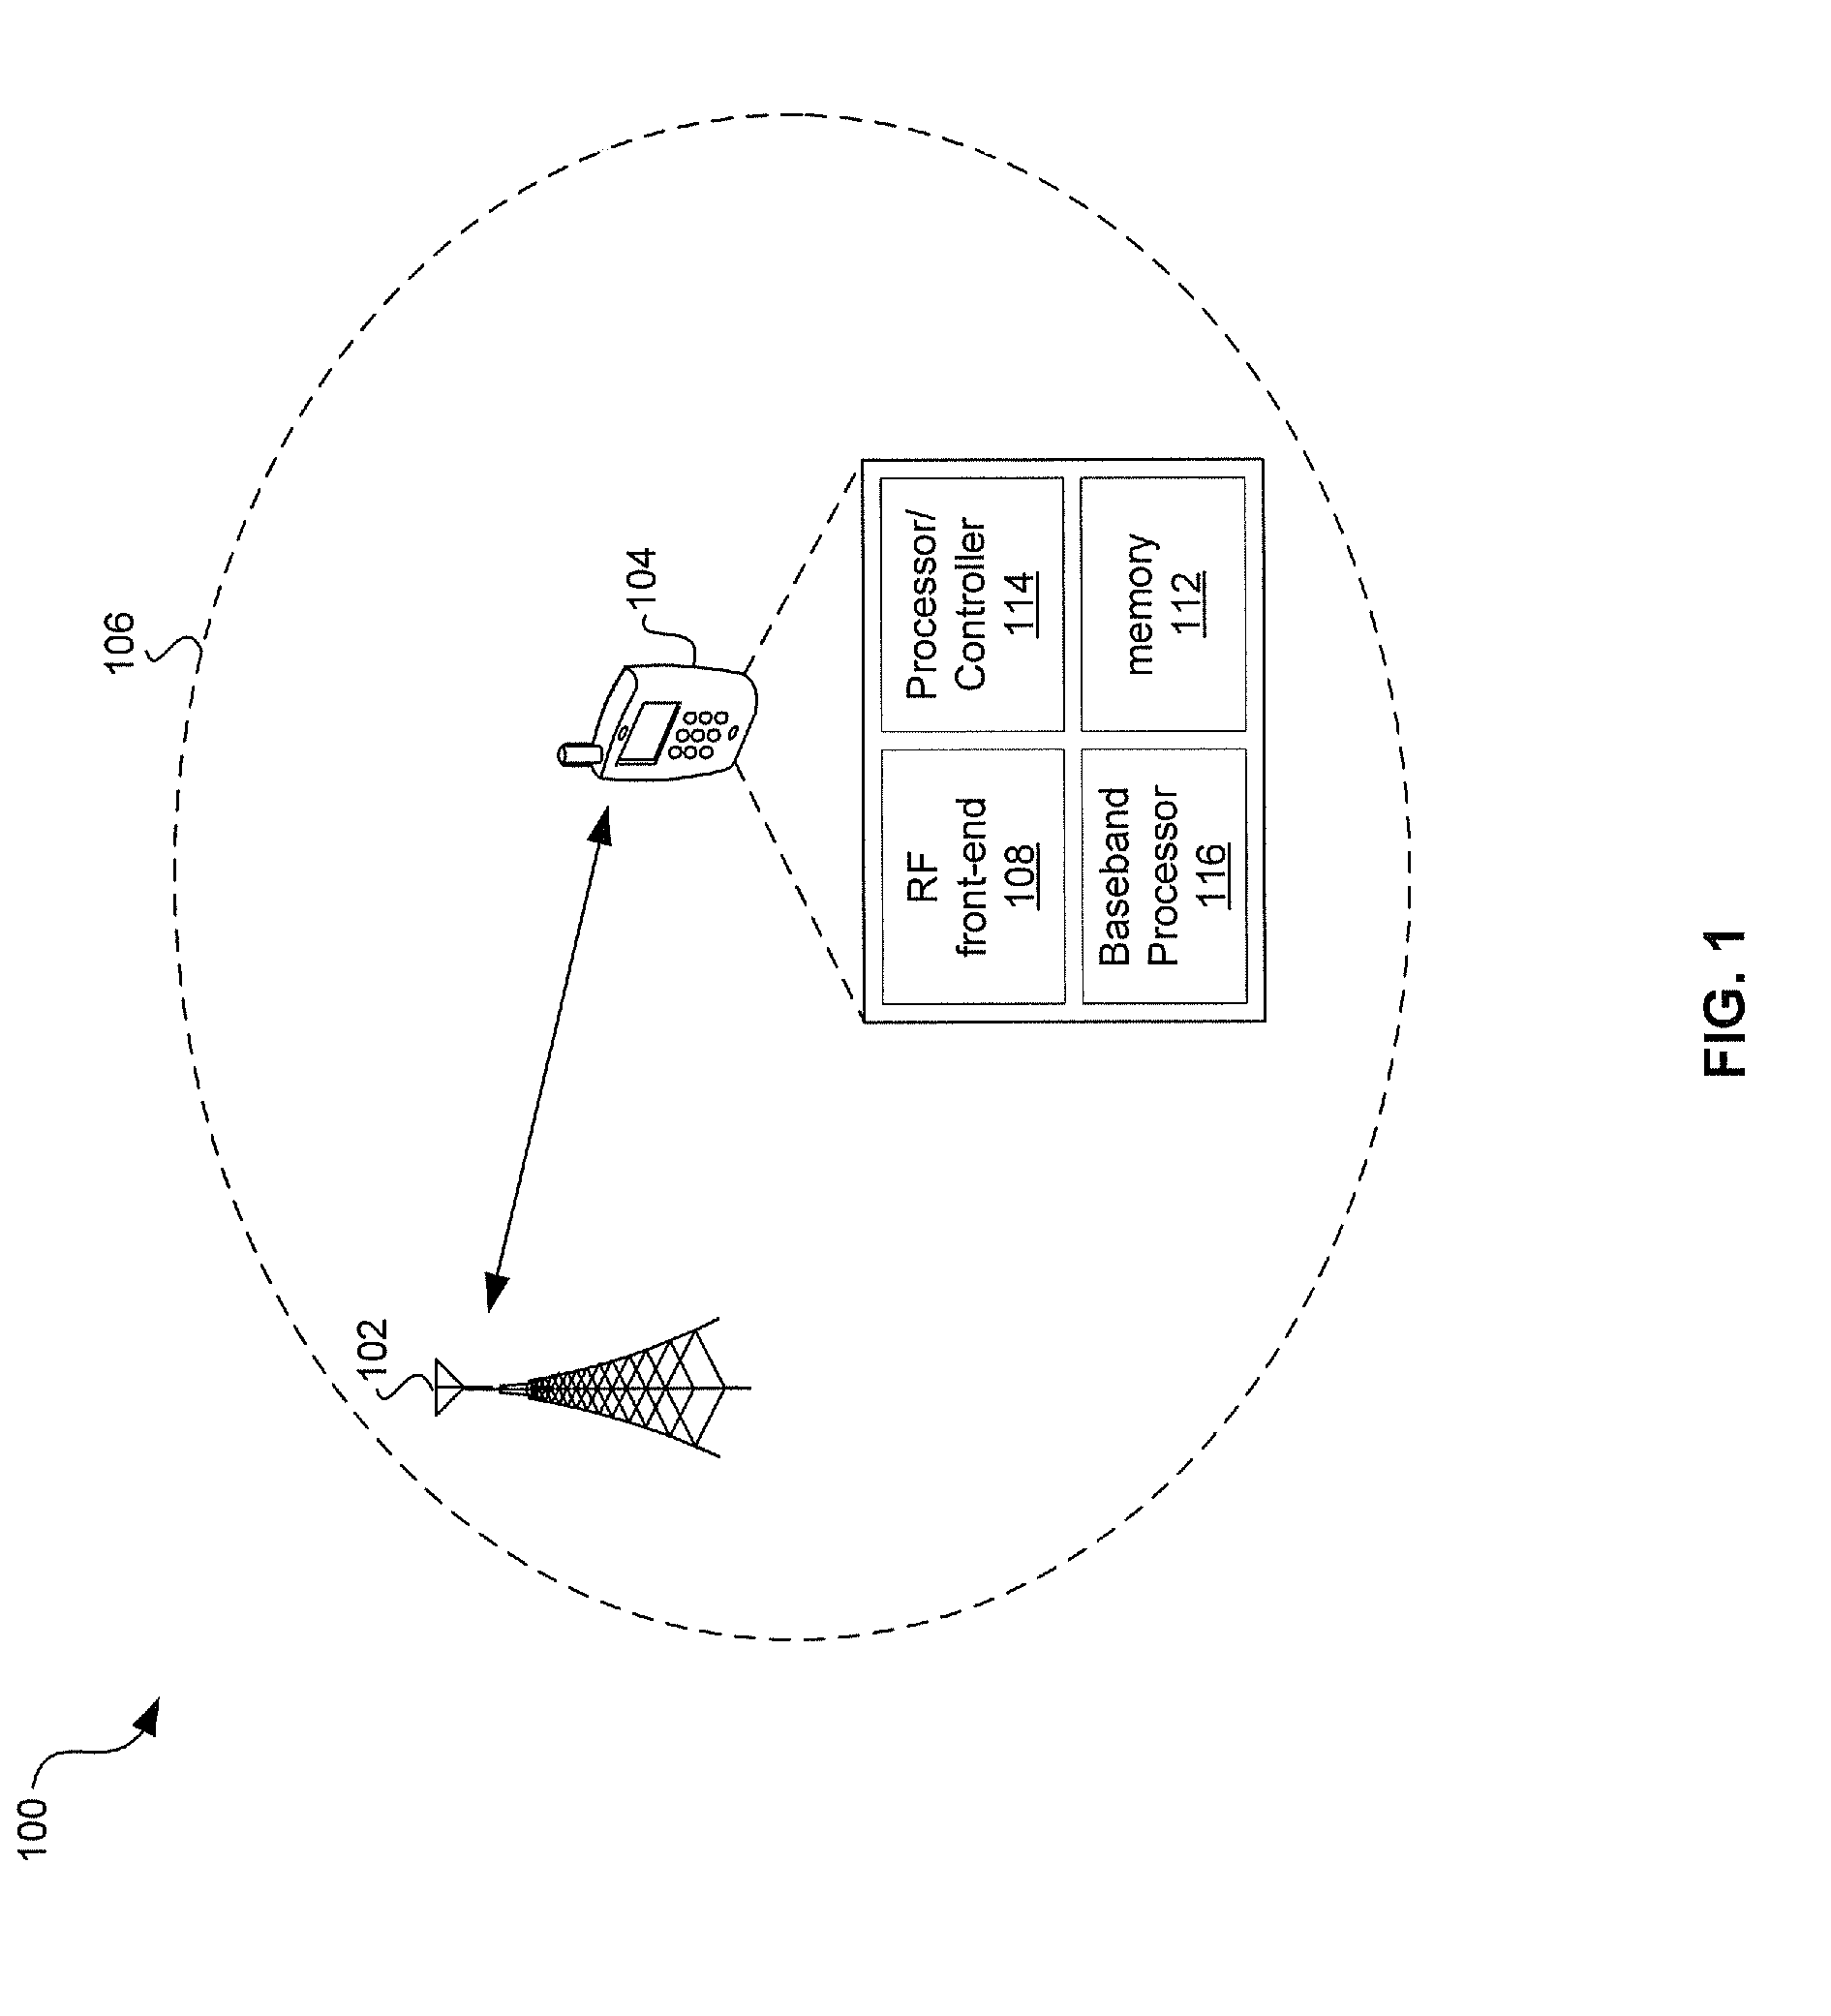 Method and system for simulation and verification of communication devices